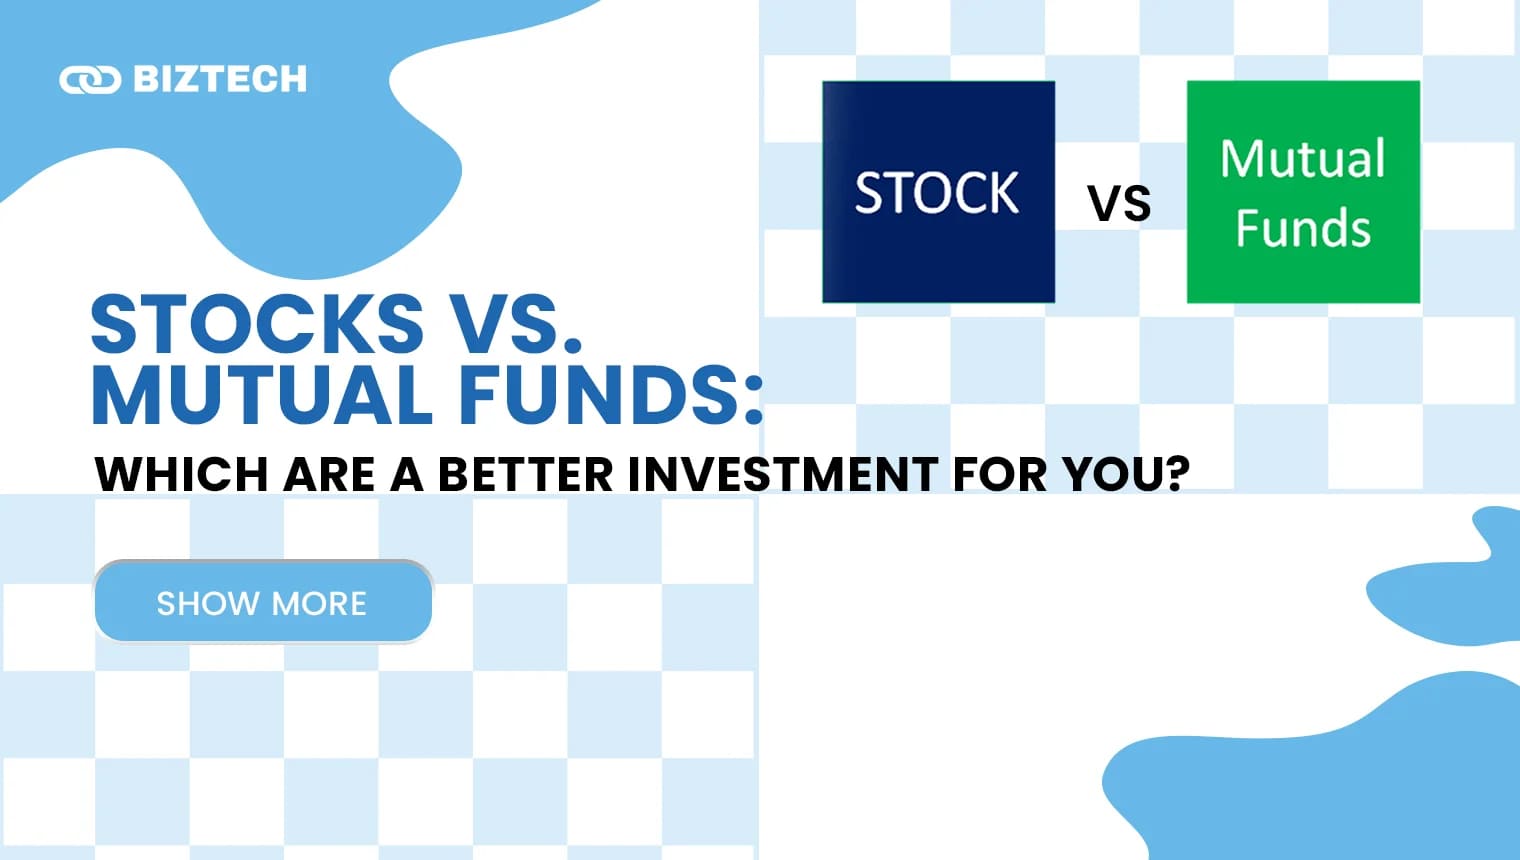 Mutual Funds or Stocks: Which Are a Better Investment for You?